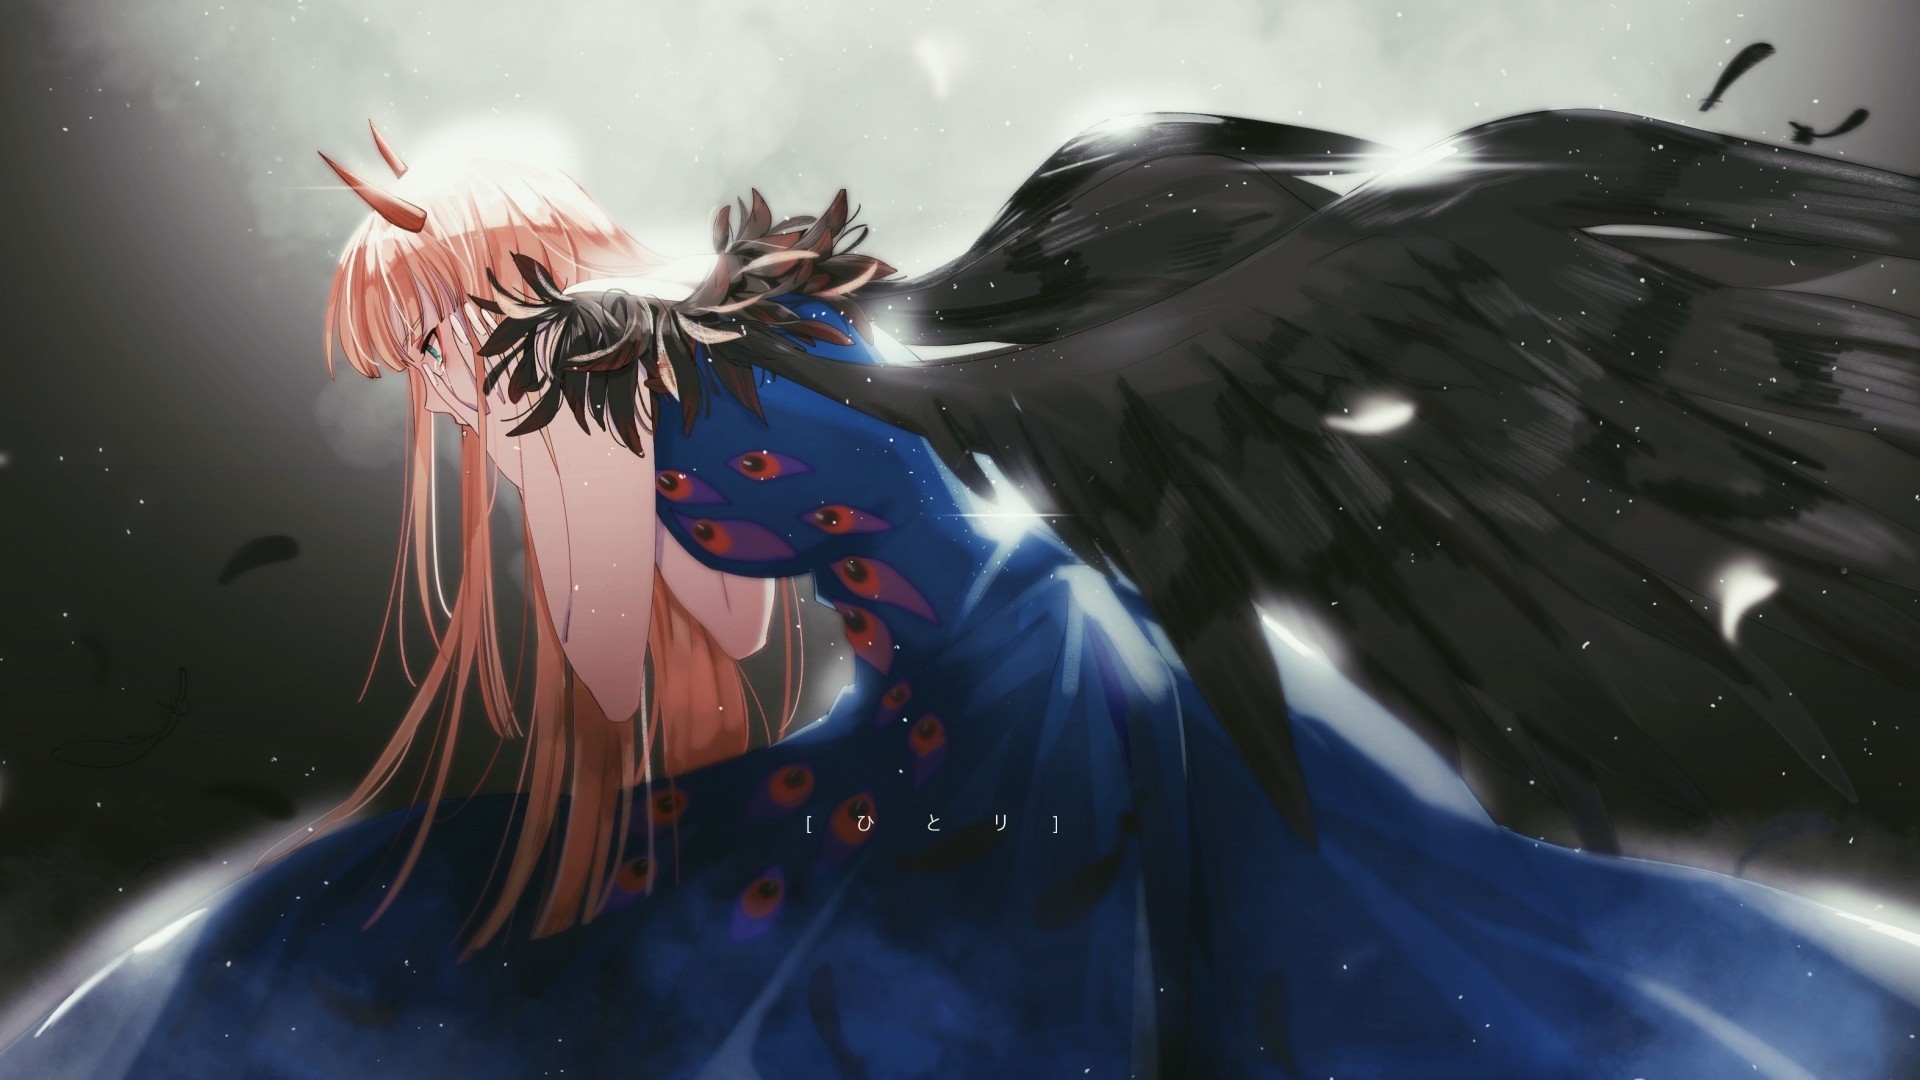 two wallpaper,cg artwork,fictional character,anime,graphic design,wing